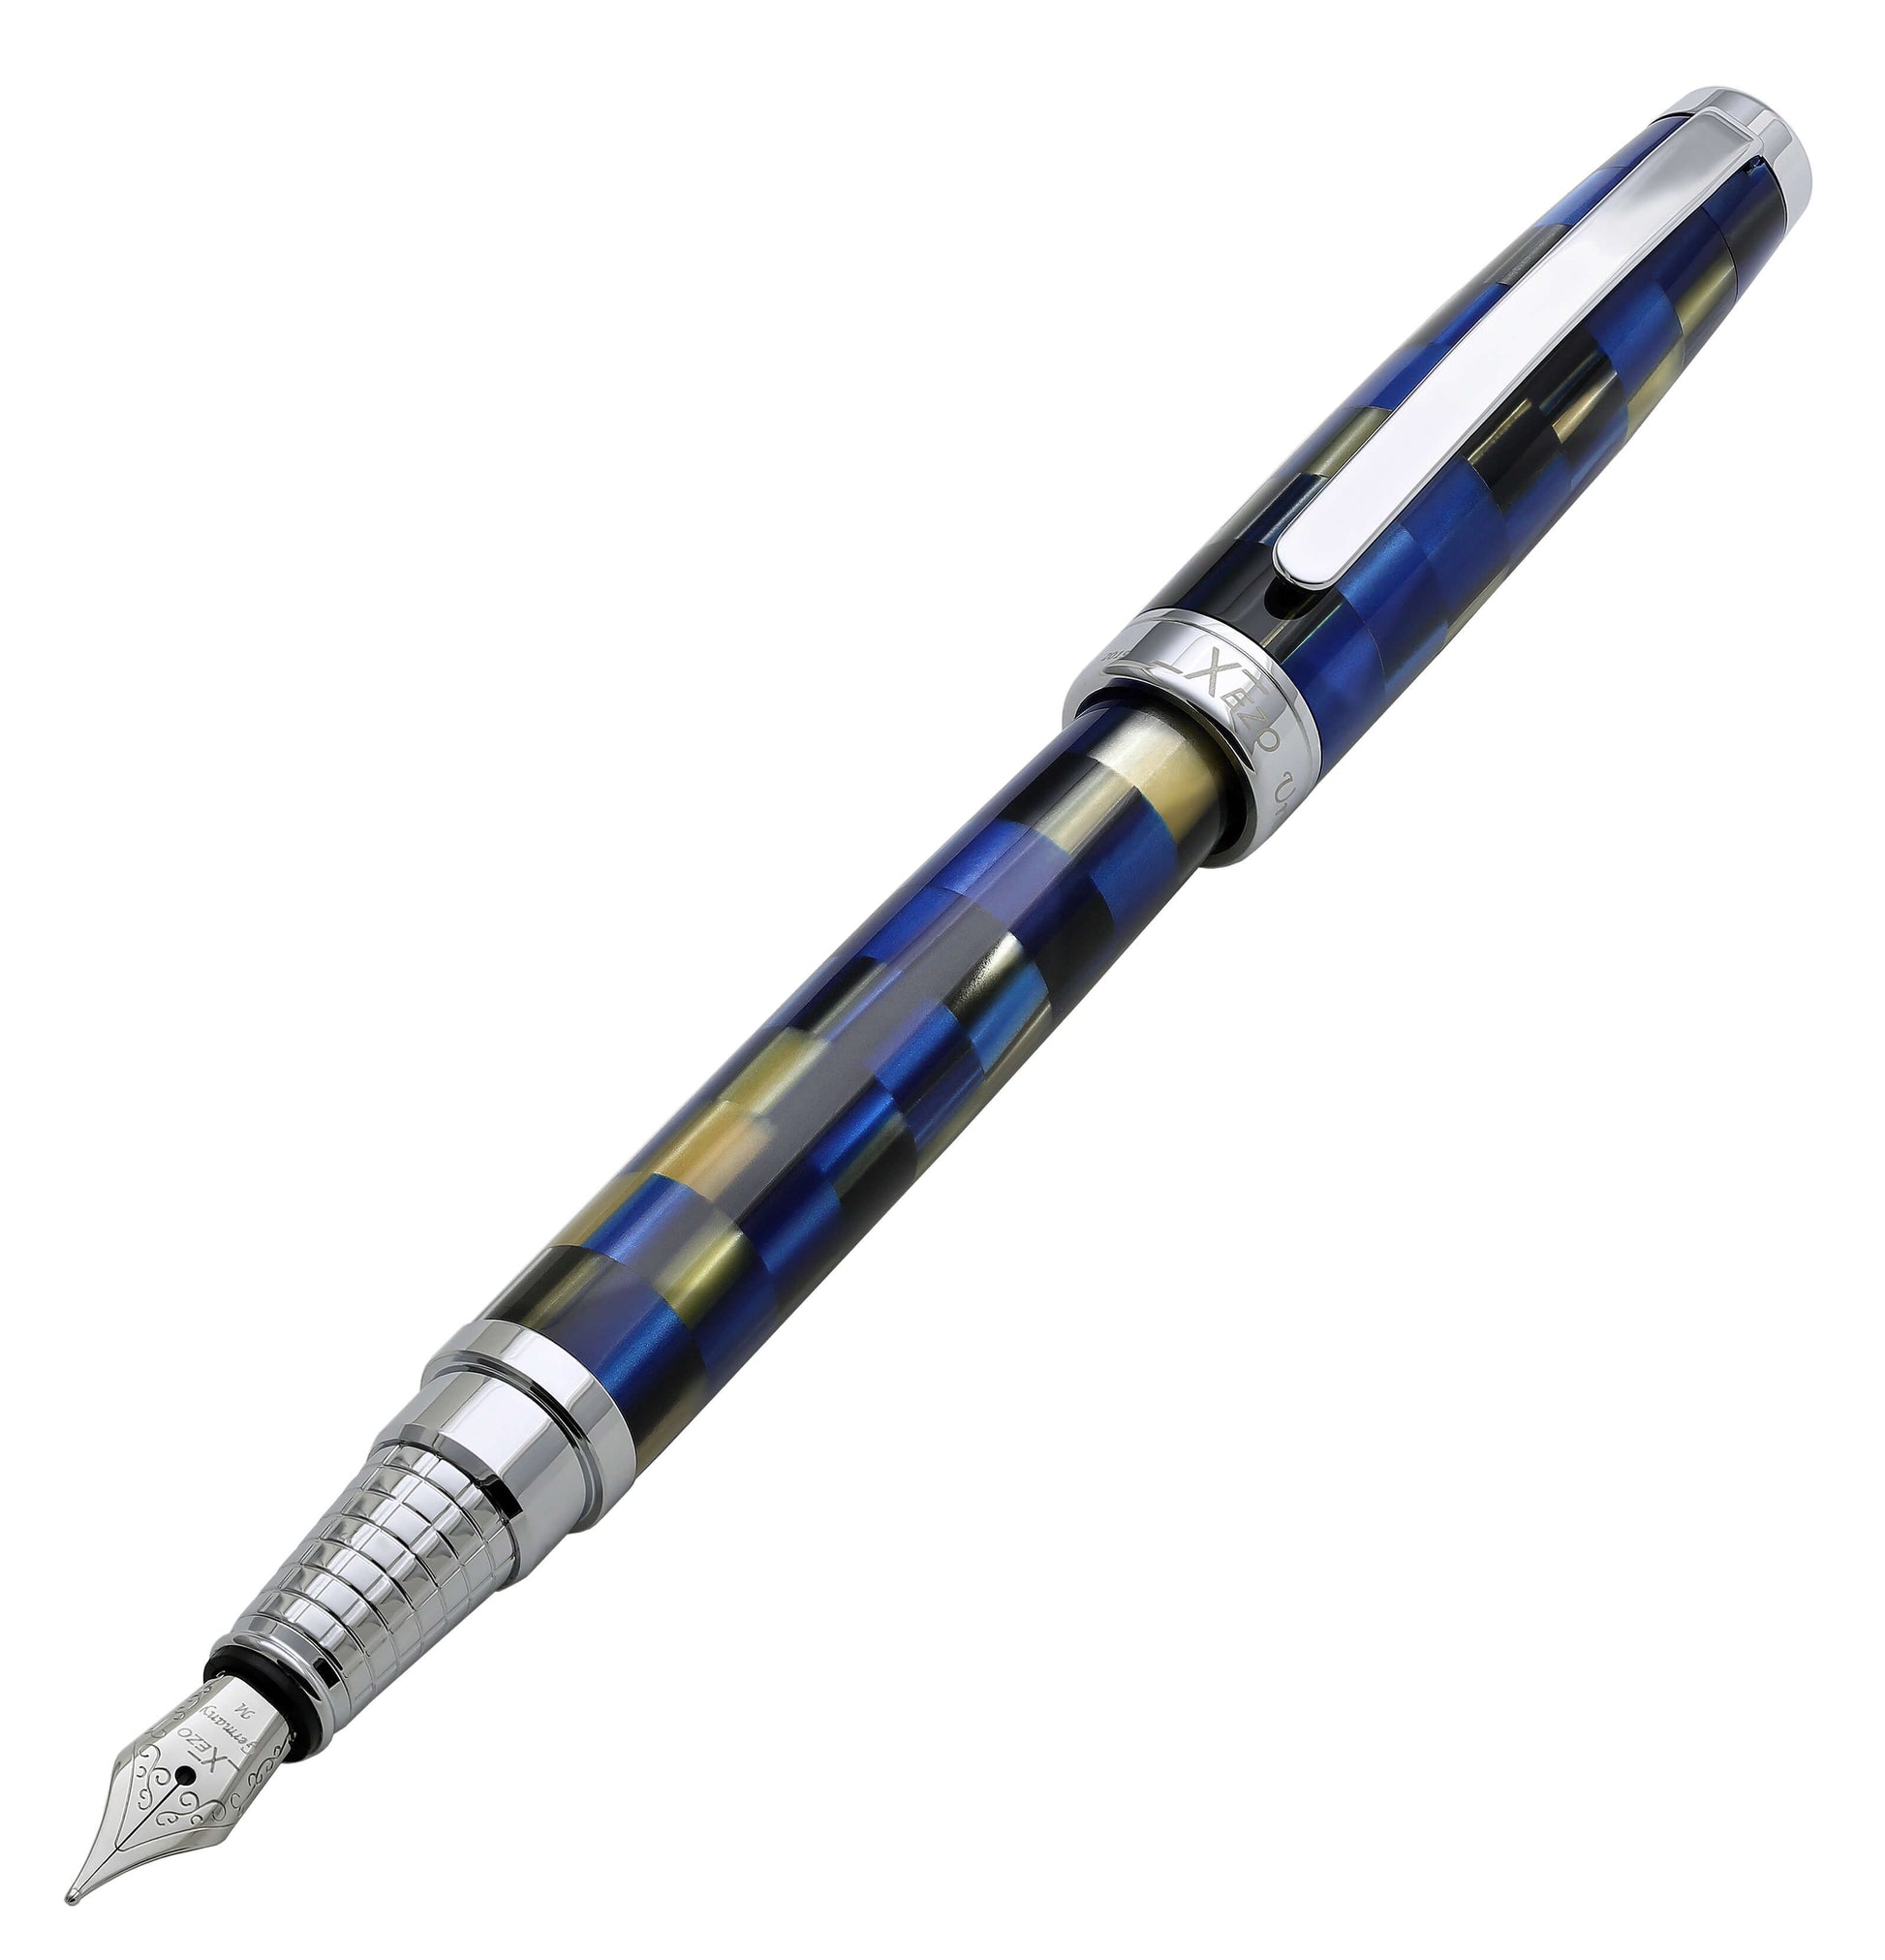 Xezo - Angled 3D view of the front of the Urbanite Blue FM fountain pen